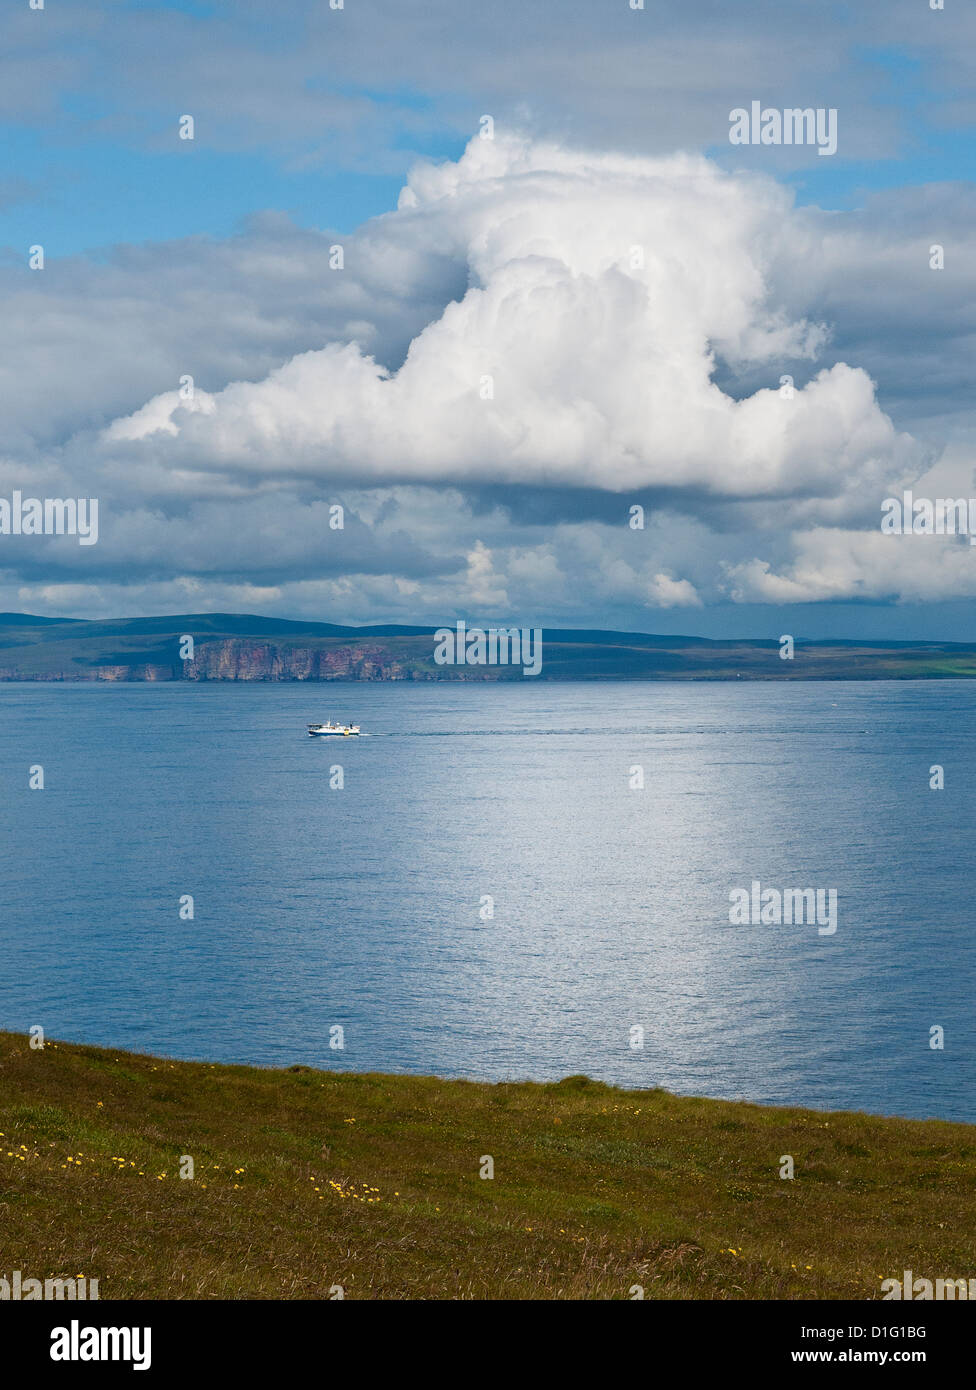 View from Dunnet Head towards Orkneys on a sunny day, with ferry crossing a calm sea, and distinct white cumulus clouds. Stock Photo